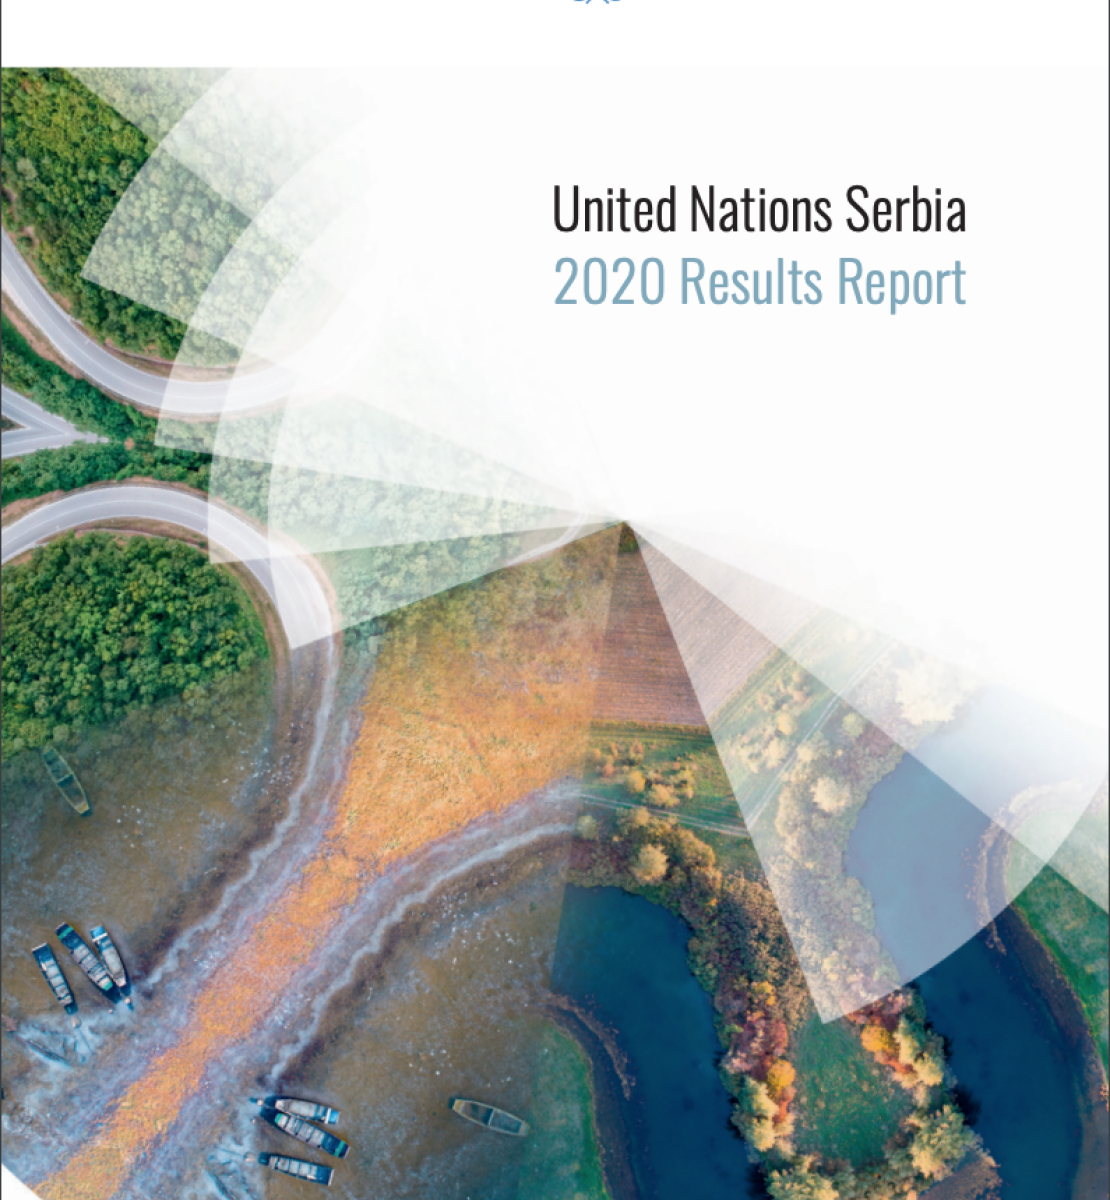 The cover shows an aerial view of a a body of water, road and vast forest with the title of the report against a white diagonal triangle on the upper right corner of the cover. The UNCT and country logos are just above the images and title. 